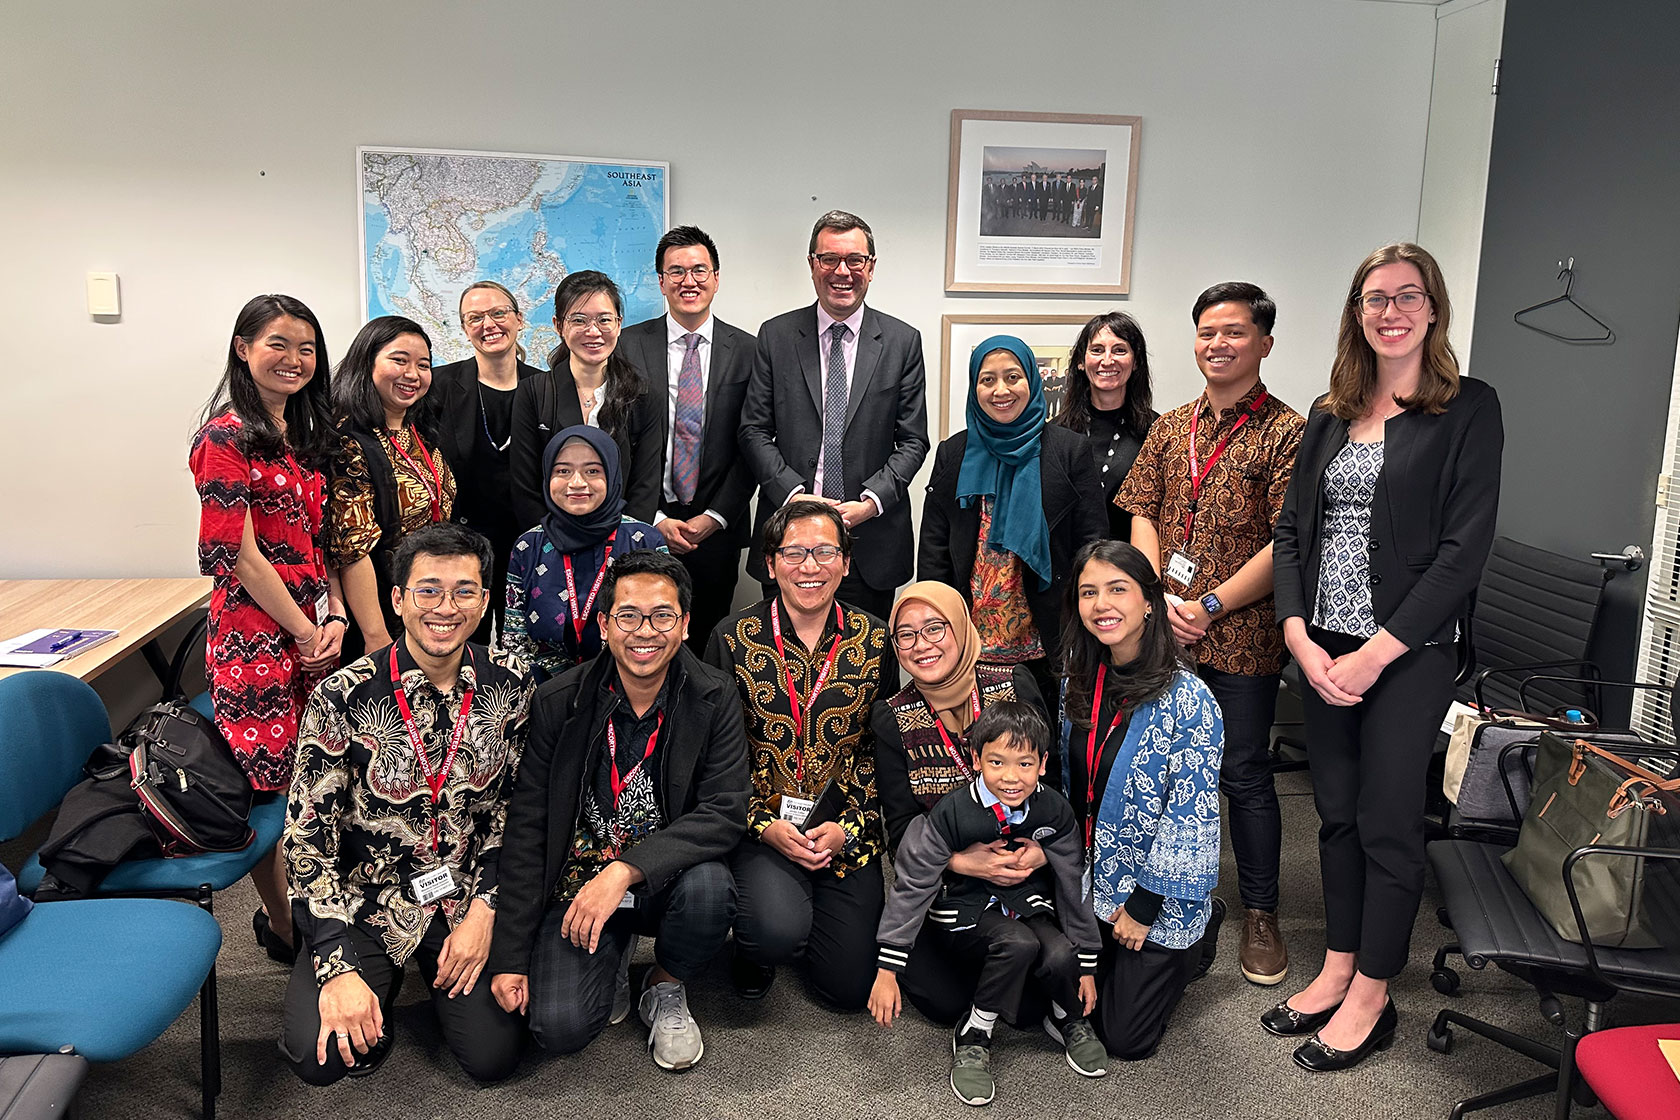 The scholars capture a group photograph alongside DFAT representatives as part of their visit to the DFAT office.